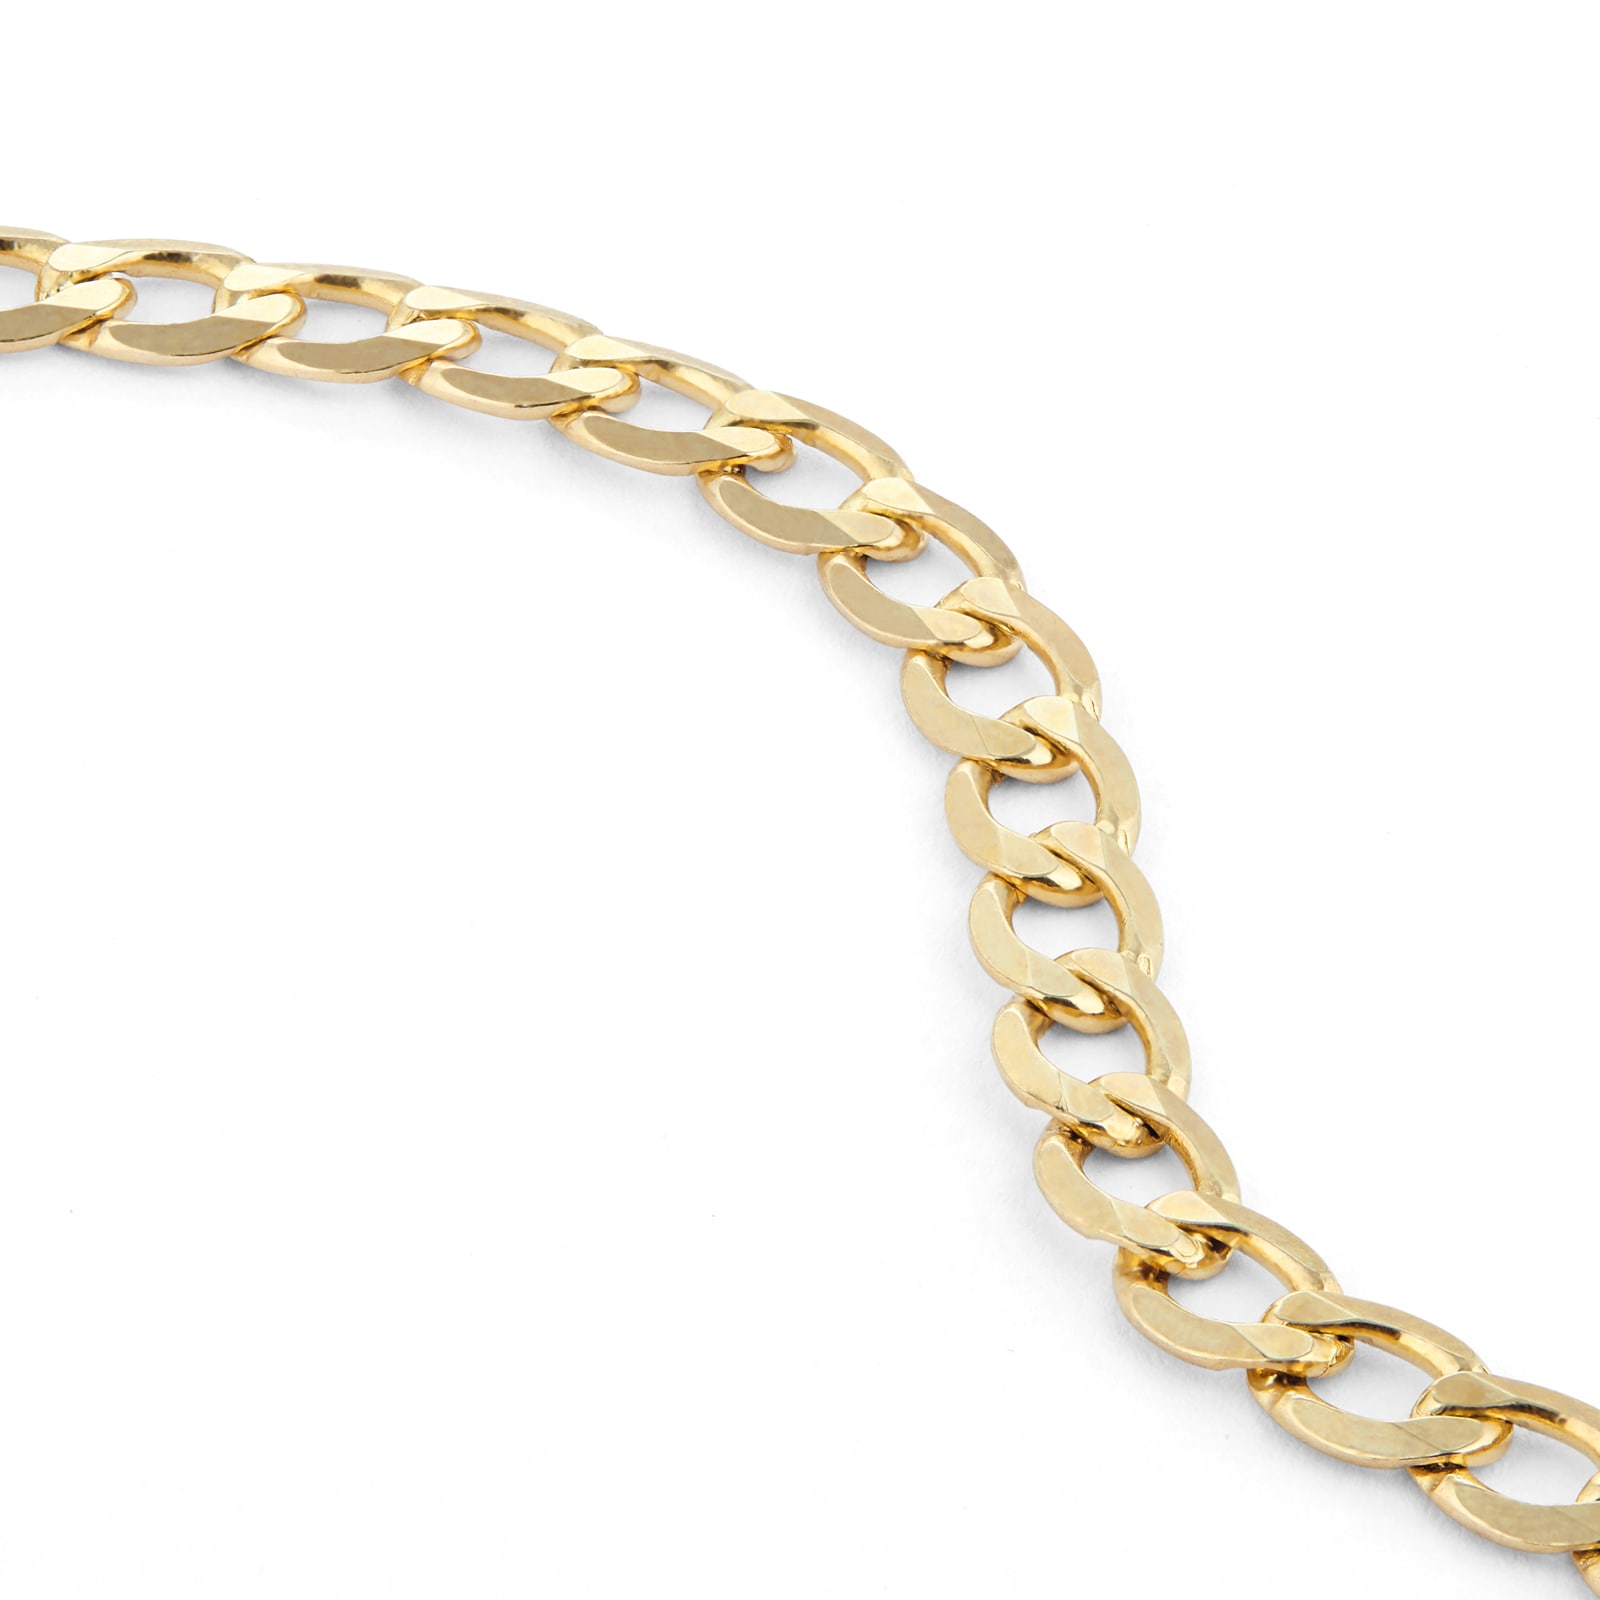 Goldsmiths 9ct Yellow Gold 8.5 inch Solid Curb Chain Bracelet ...